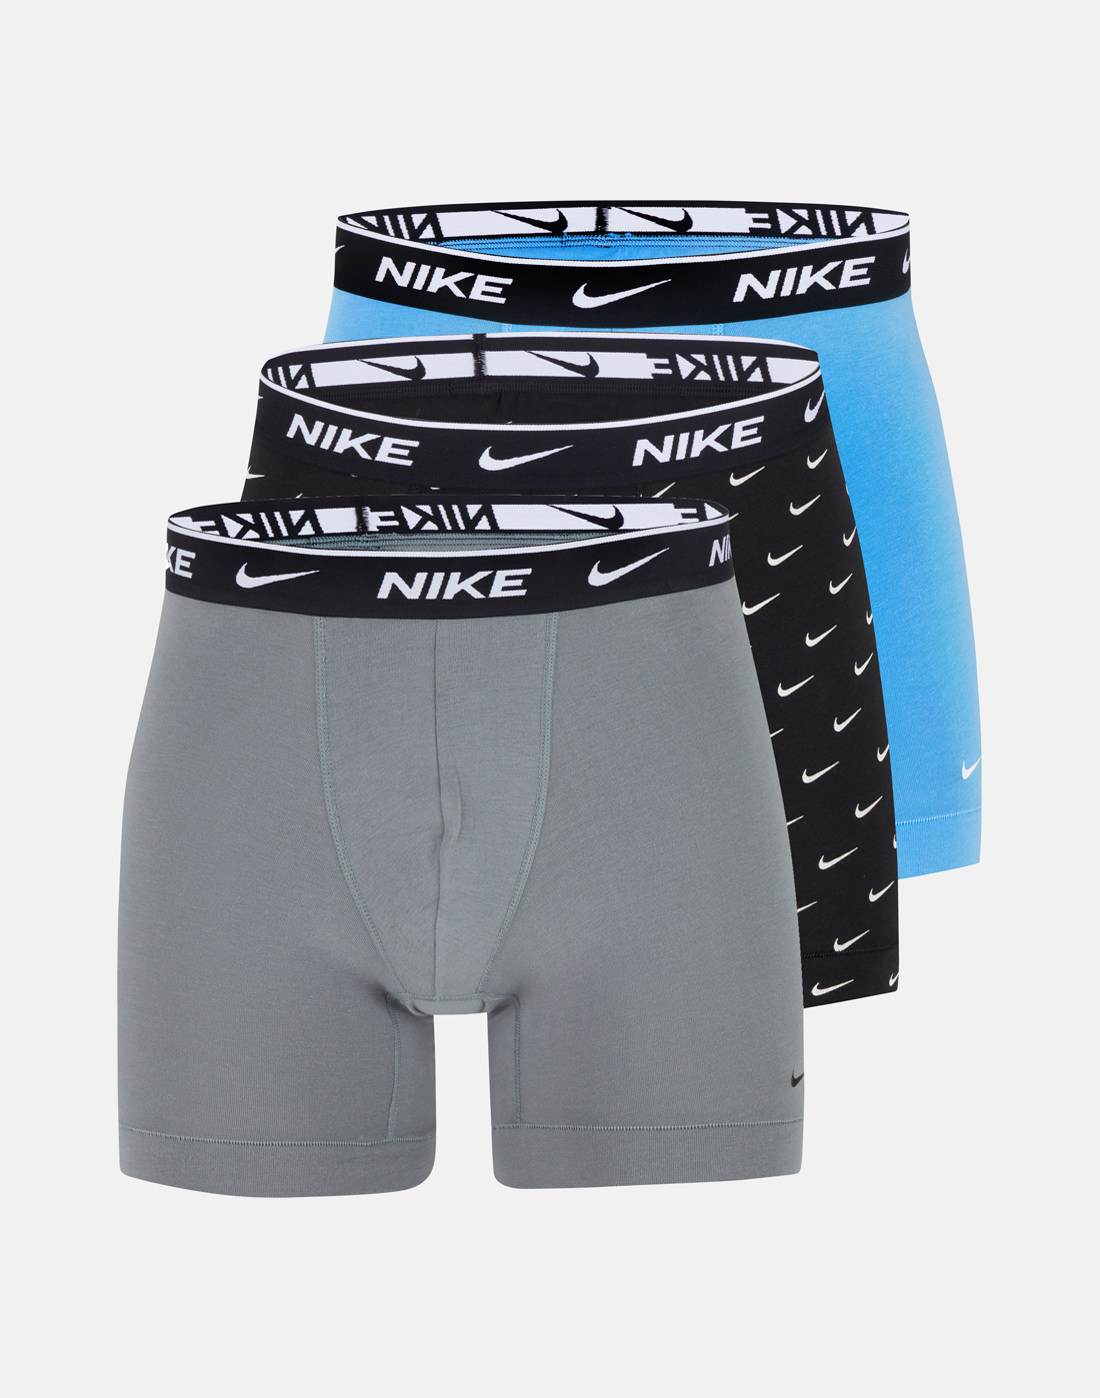 Nike Mens Cotton 3 Pack Brief Boxers - Blue | Life Style Sports IE